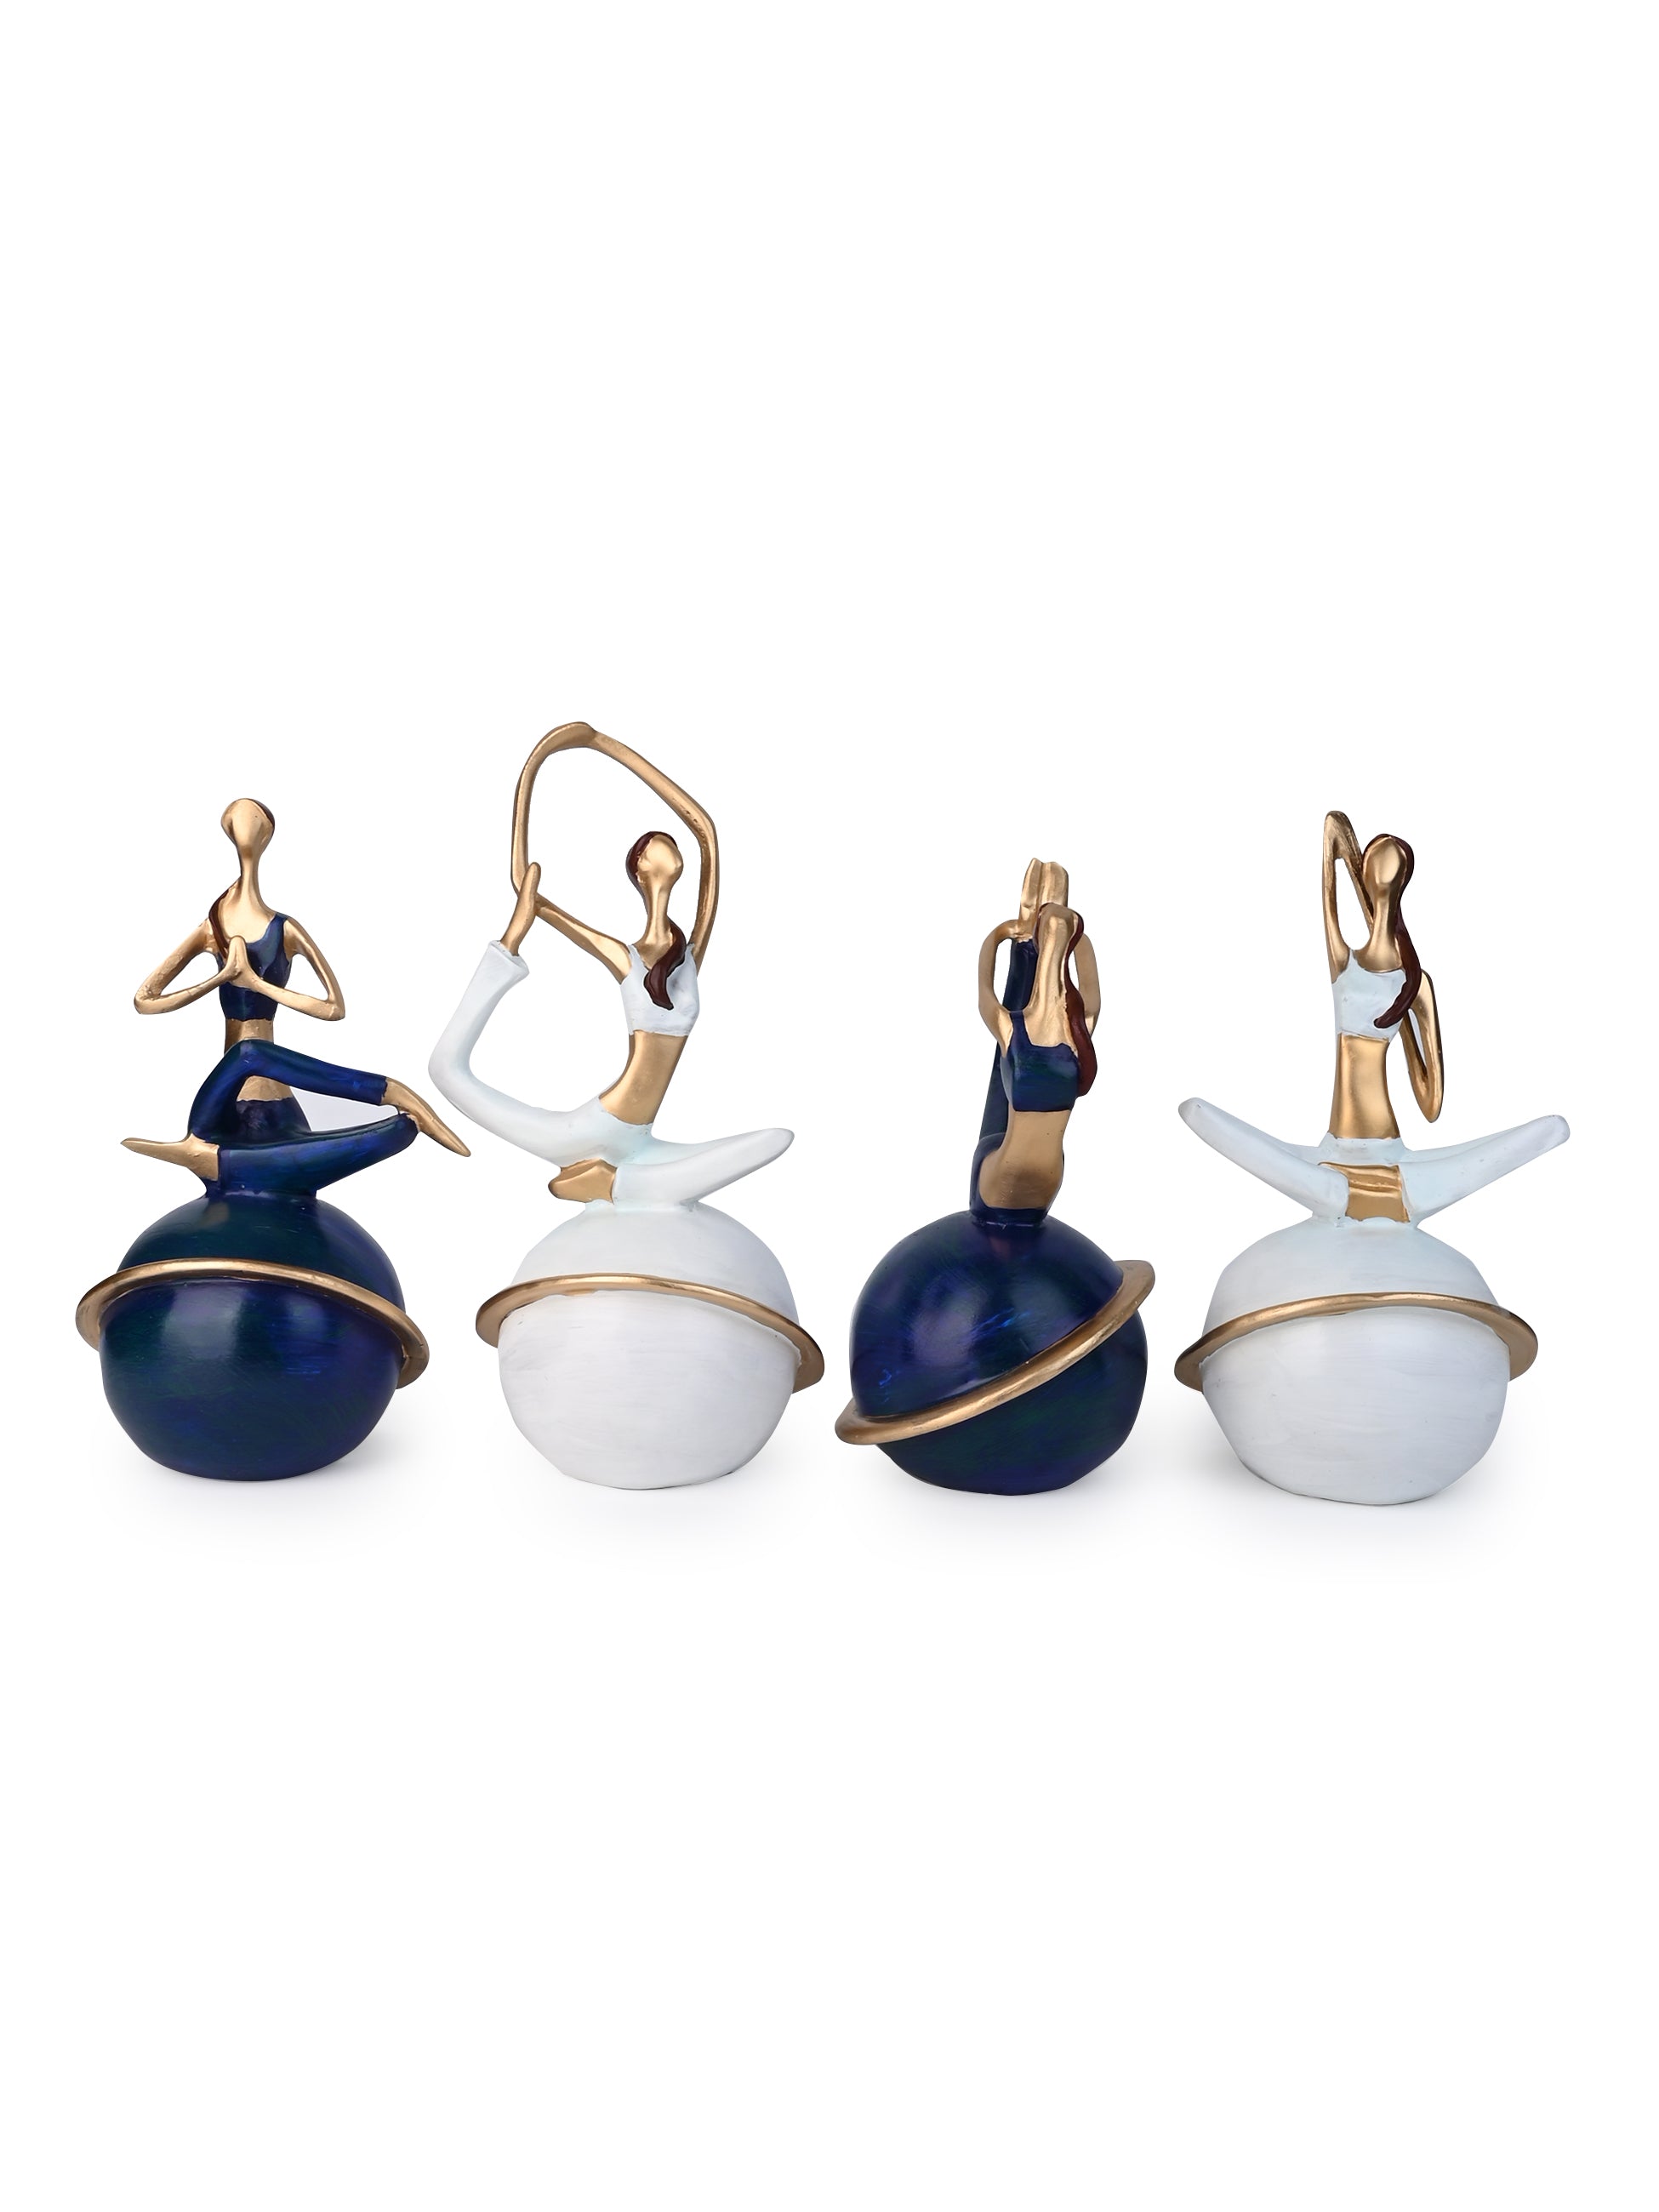 Set of 4 Yoga Ladies Crafted out of Resin - Home Decor Showpiece